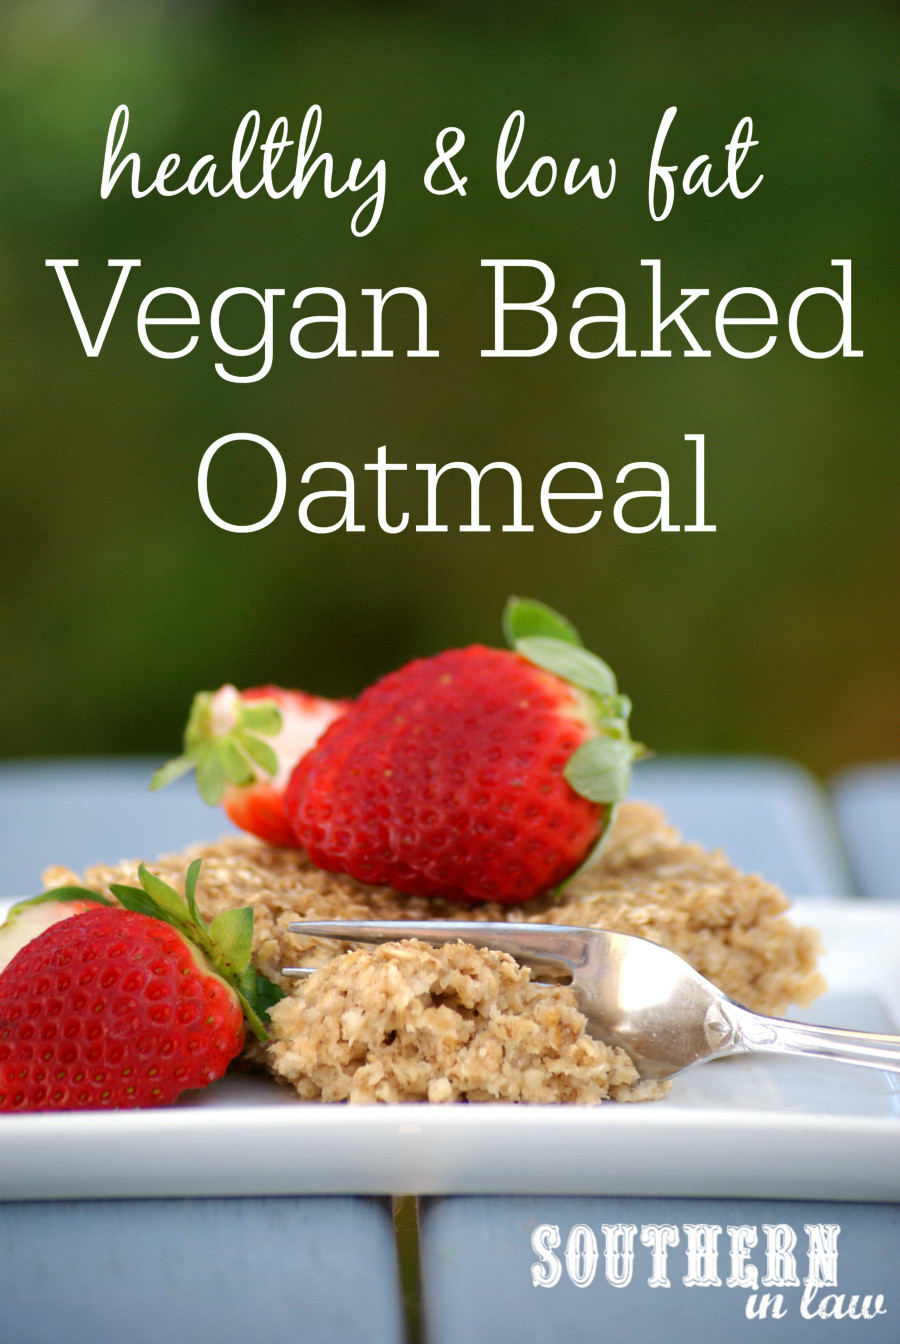 Vegan Oatmeal Recipes
 Southern In Law Recipe The Best Vegan Baked Oatmeal